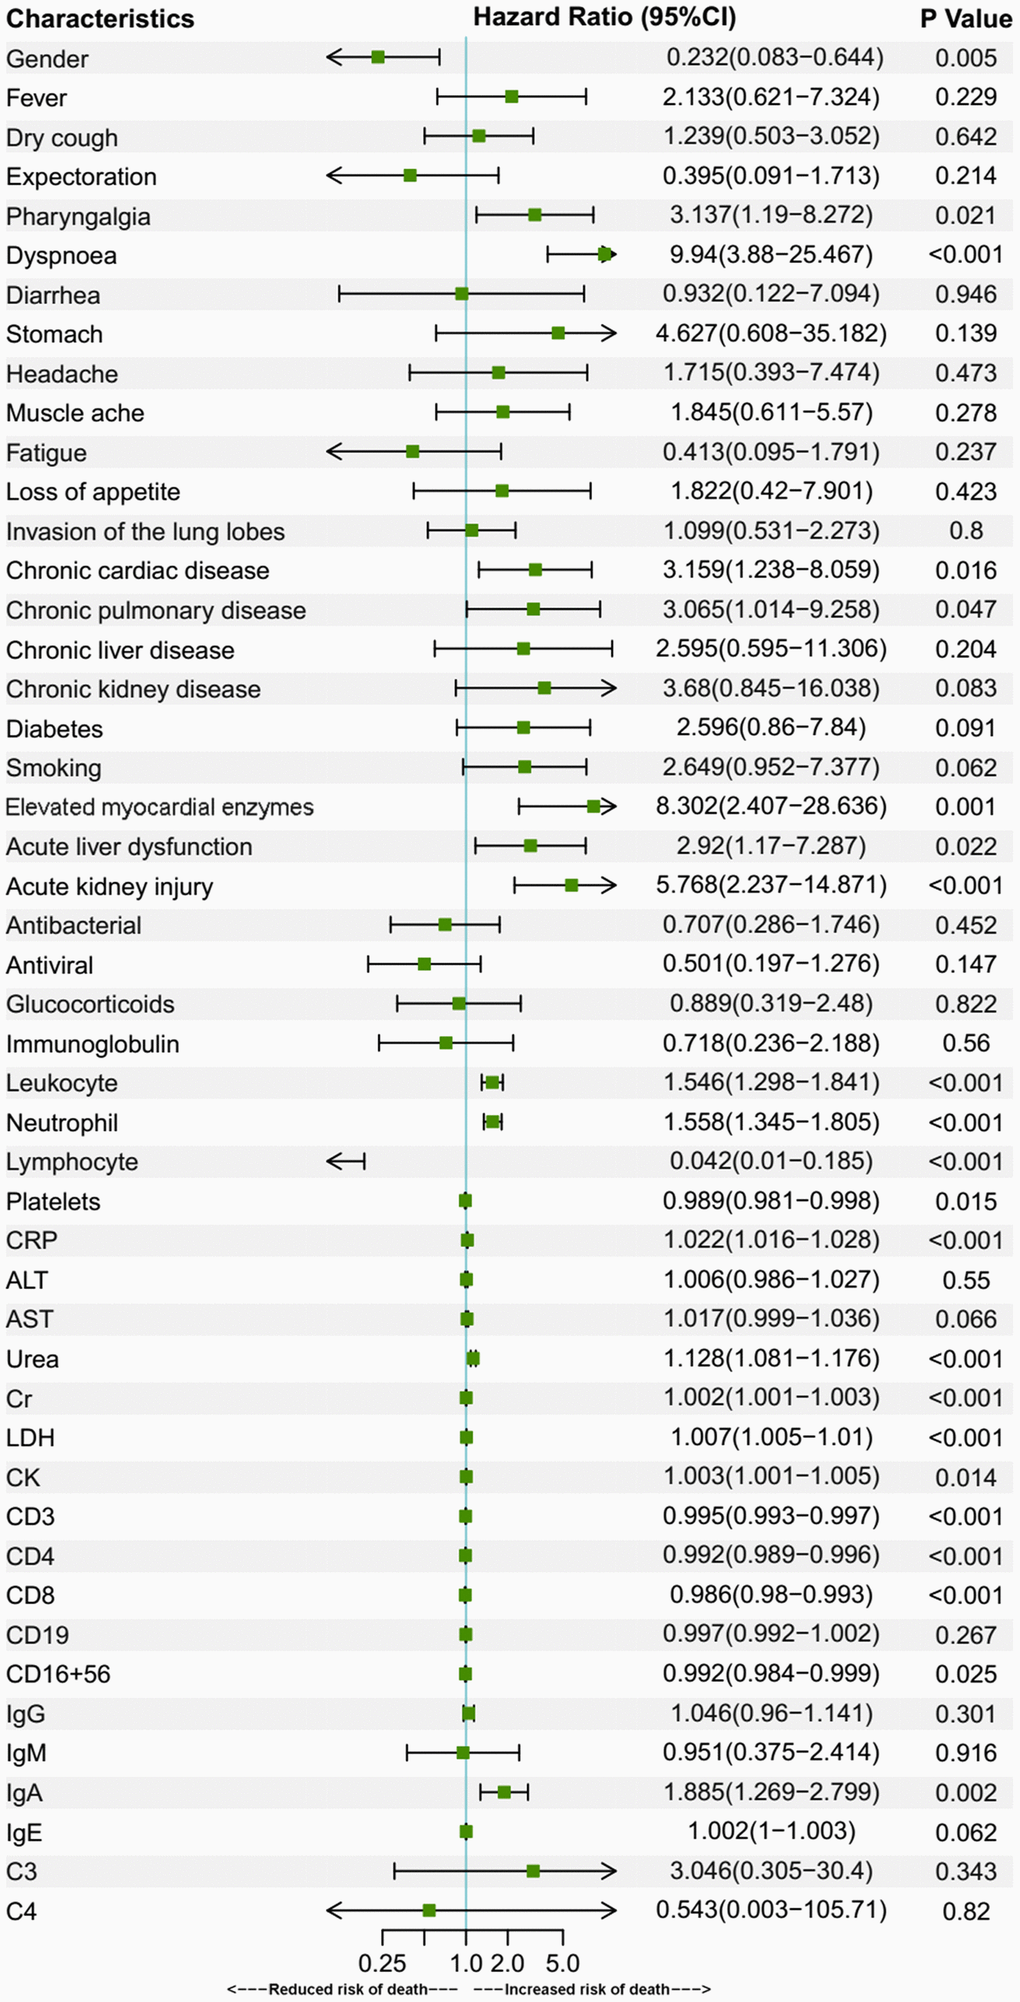 Univariate Cox regression for prognostic factors of under-70 group patients. Univariate Cox regression analysis of fatality risk factors in under-70 patients. Elevated myocardial enzymes were defined if serum LDH or CK was above the upper reference limit. Data are represented as means with 95% confidence intervals. Abbreviations: CI, confidence interval; CRP, C-reactive protein; ALT, alanine aminotransferase; AST, aspartate aminotransferase; Cr, creatinine; LDH, lactate dehydrogenase; CK, creatine kinase.